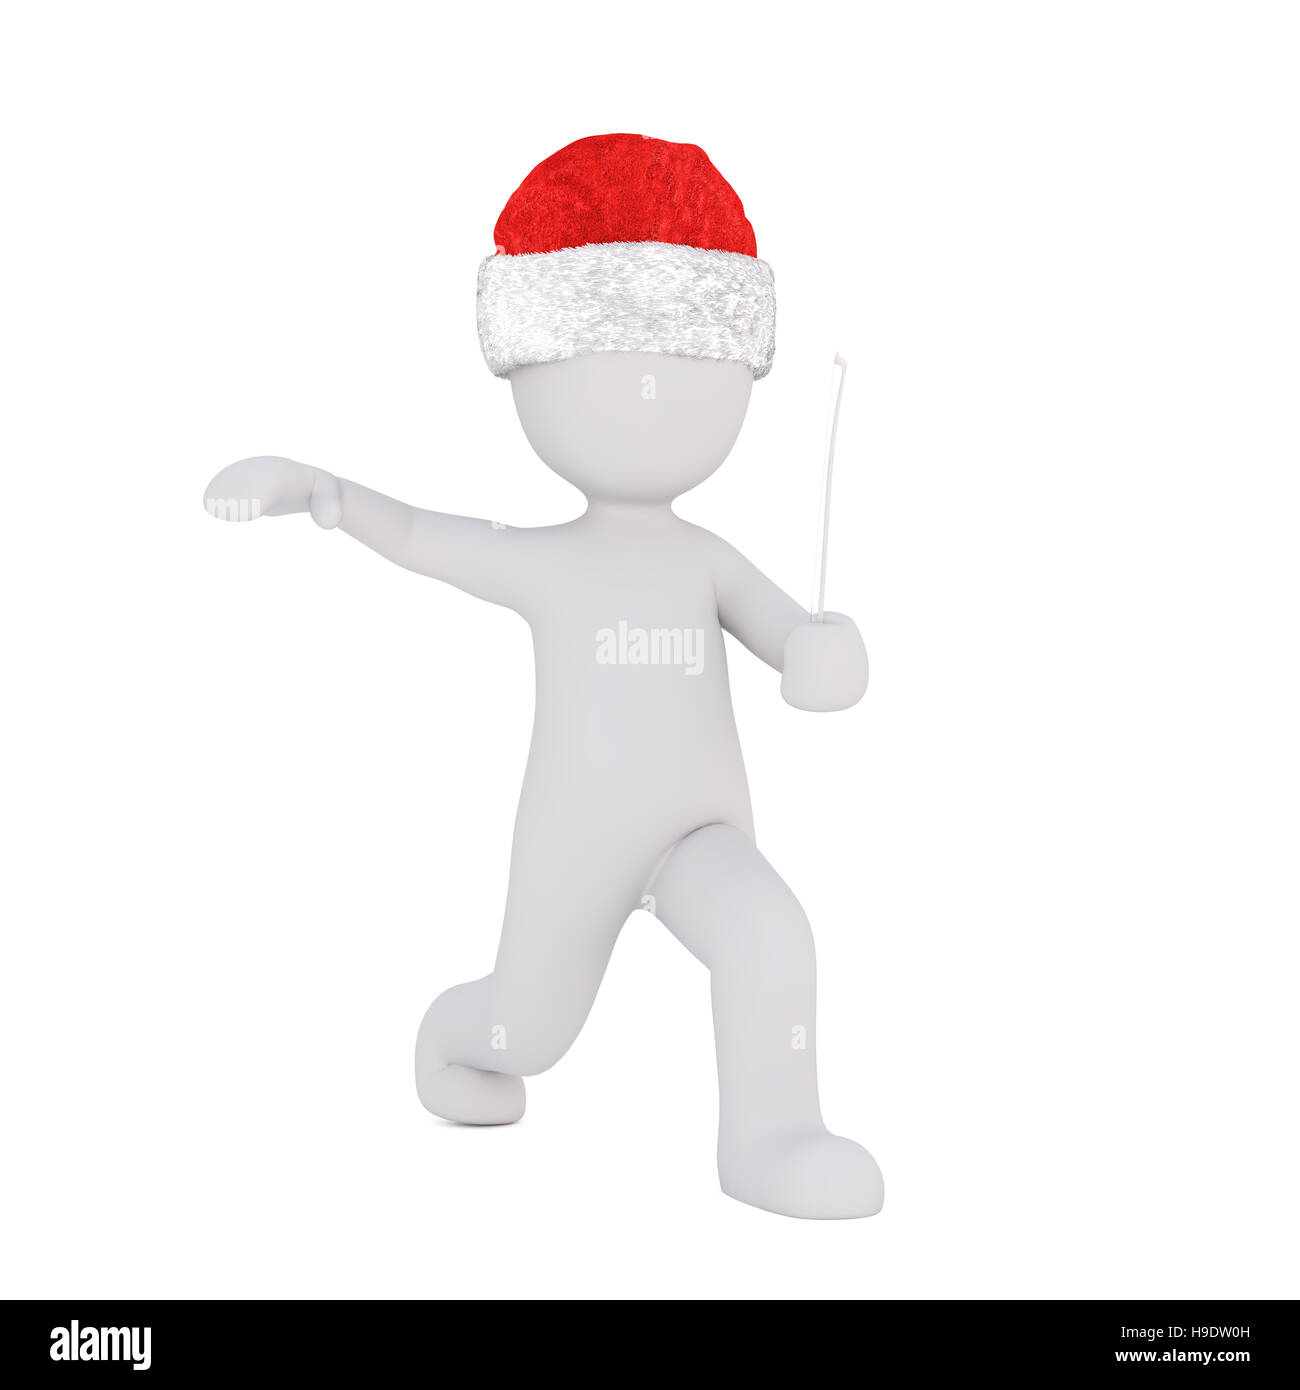 Adorable 3D illustrated man raises one arm and bends at the knee while wearing santa hat Stock Photo